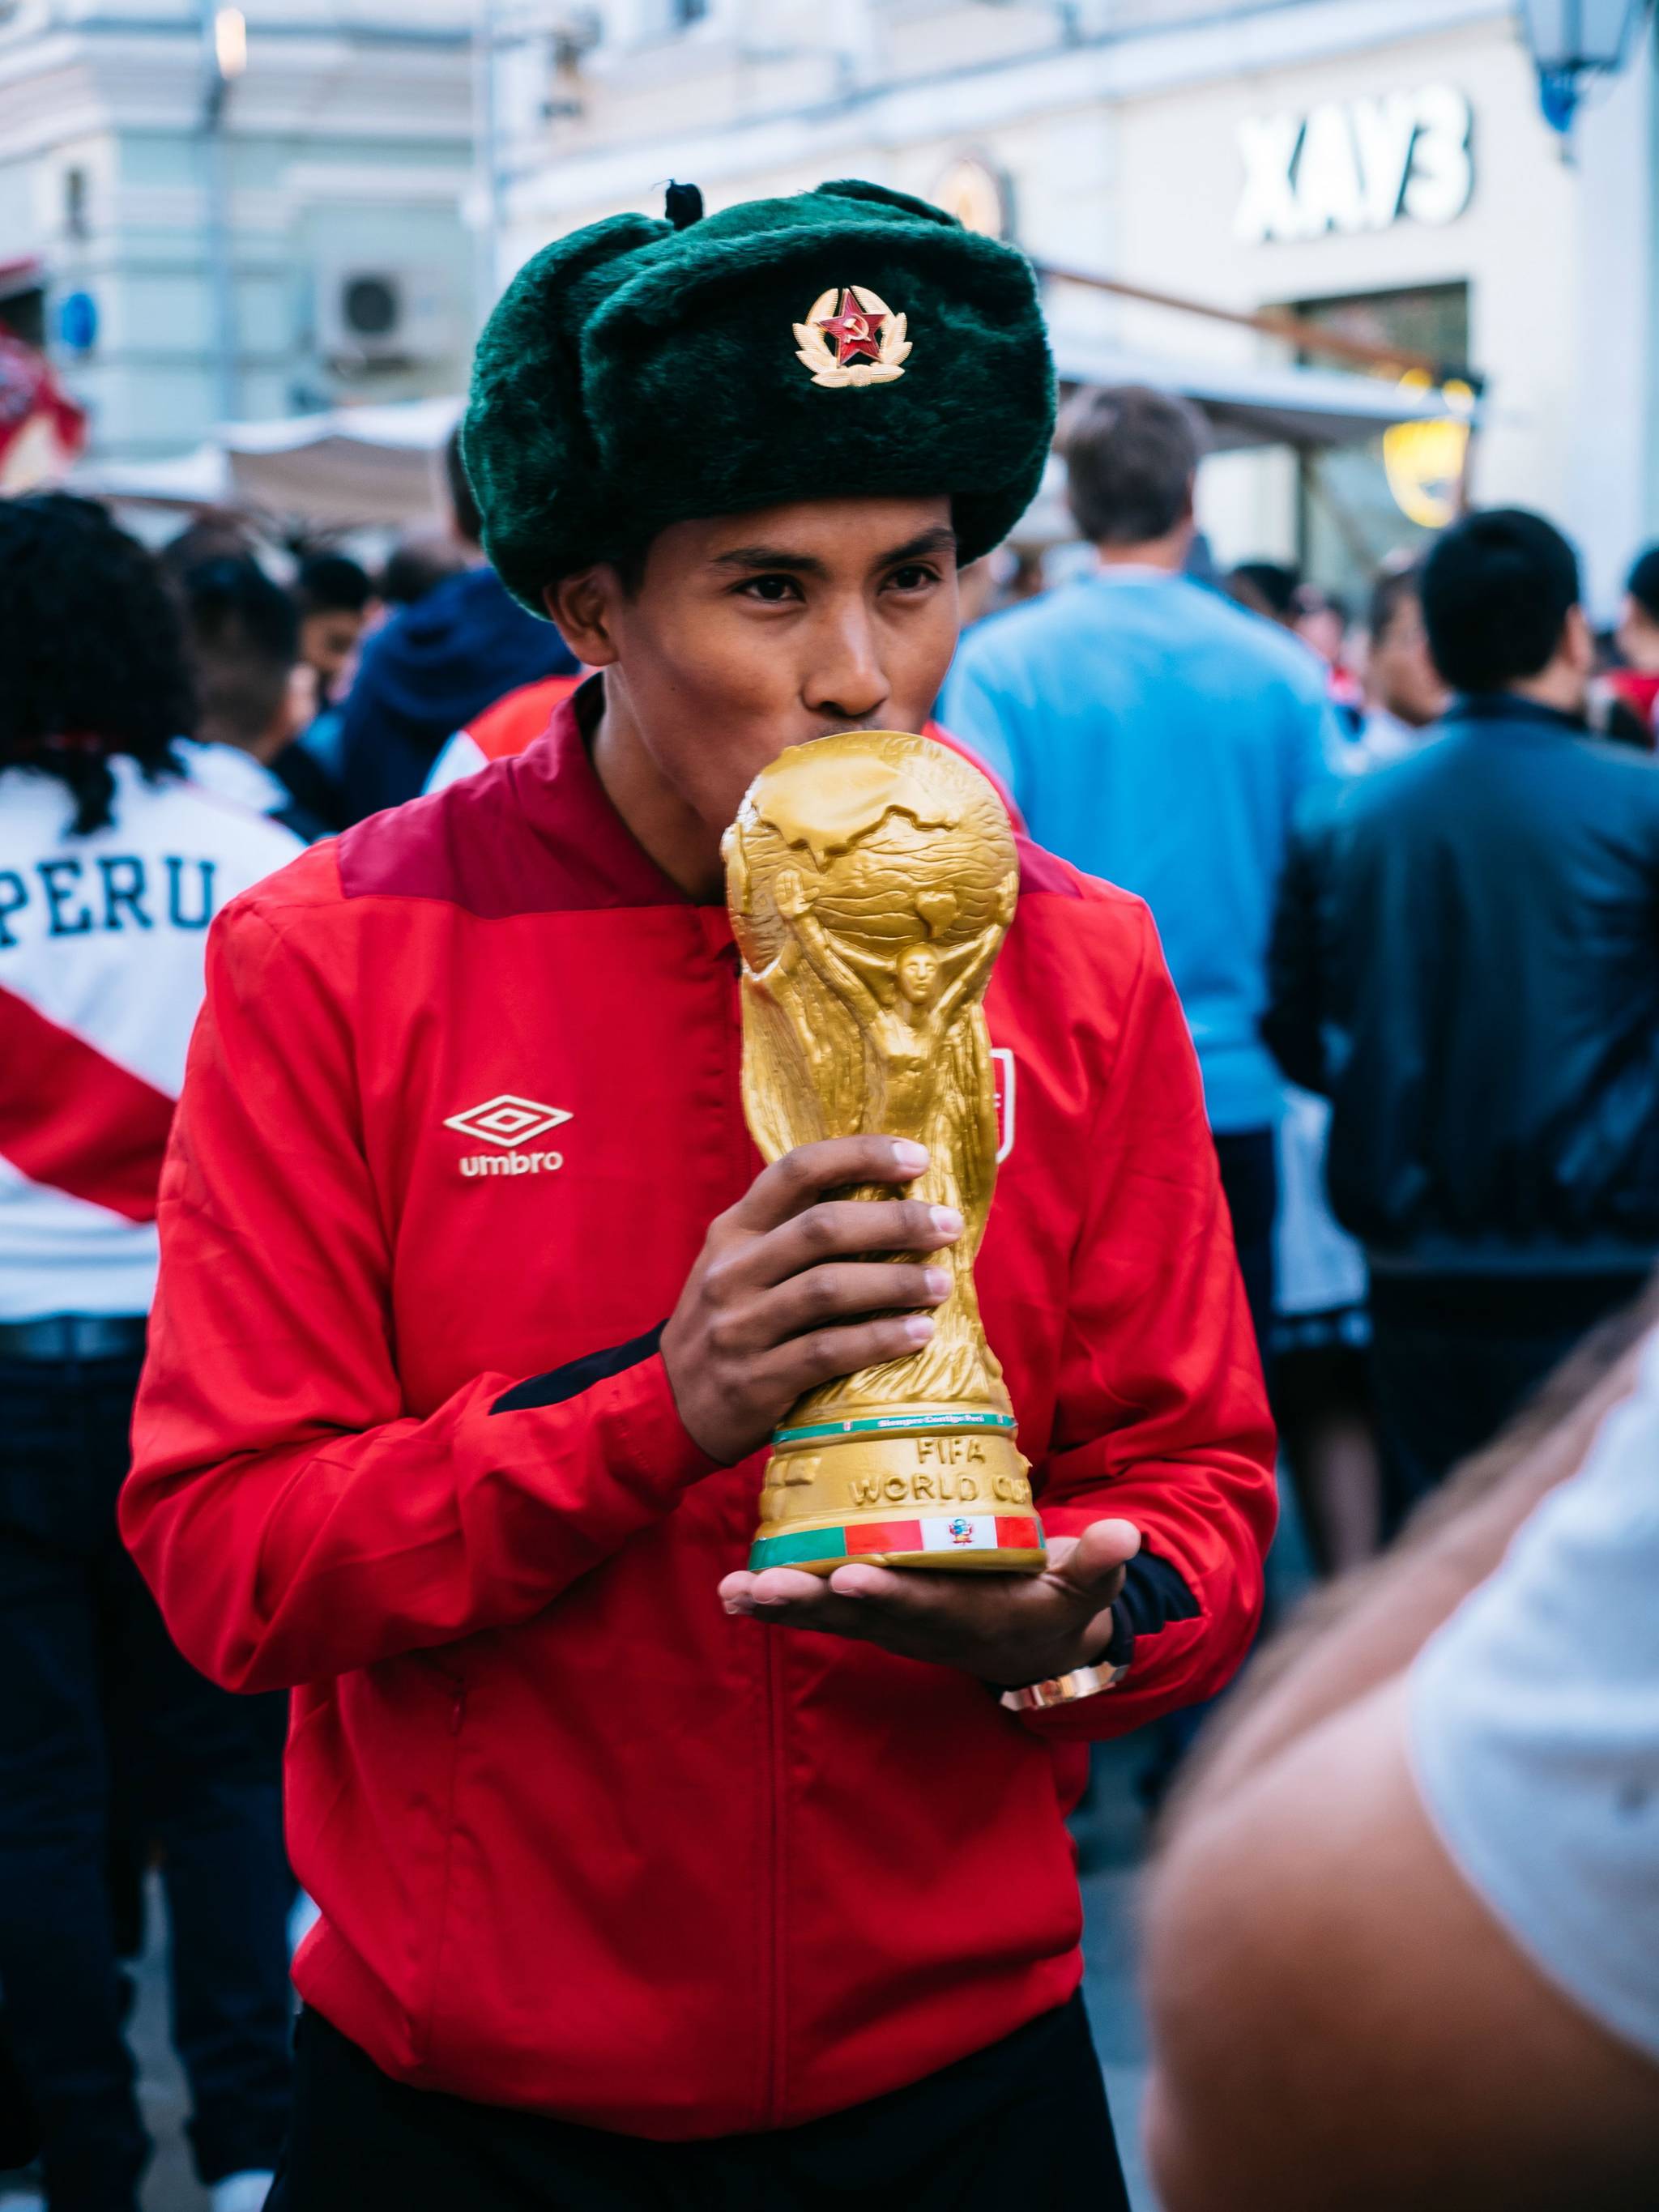 What does the World Cup mean to Russians?